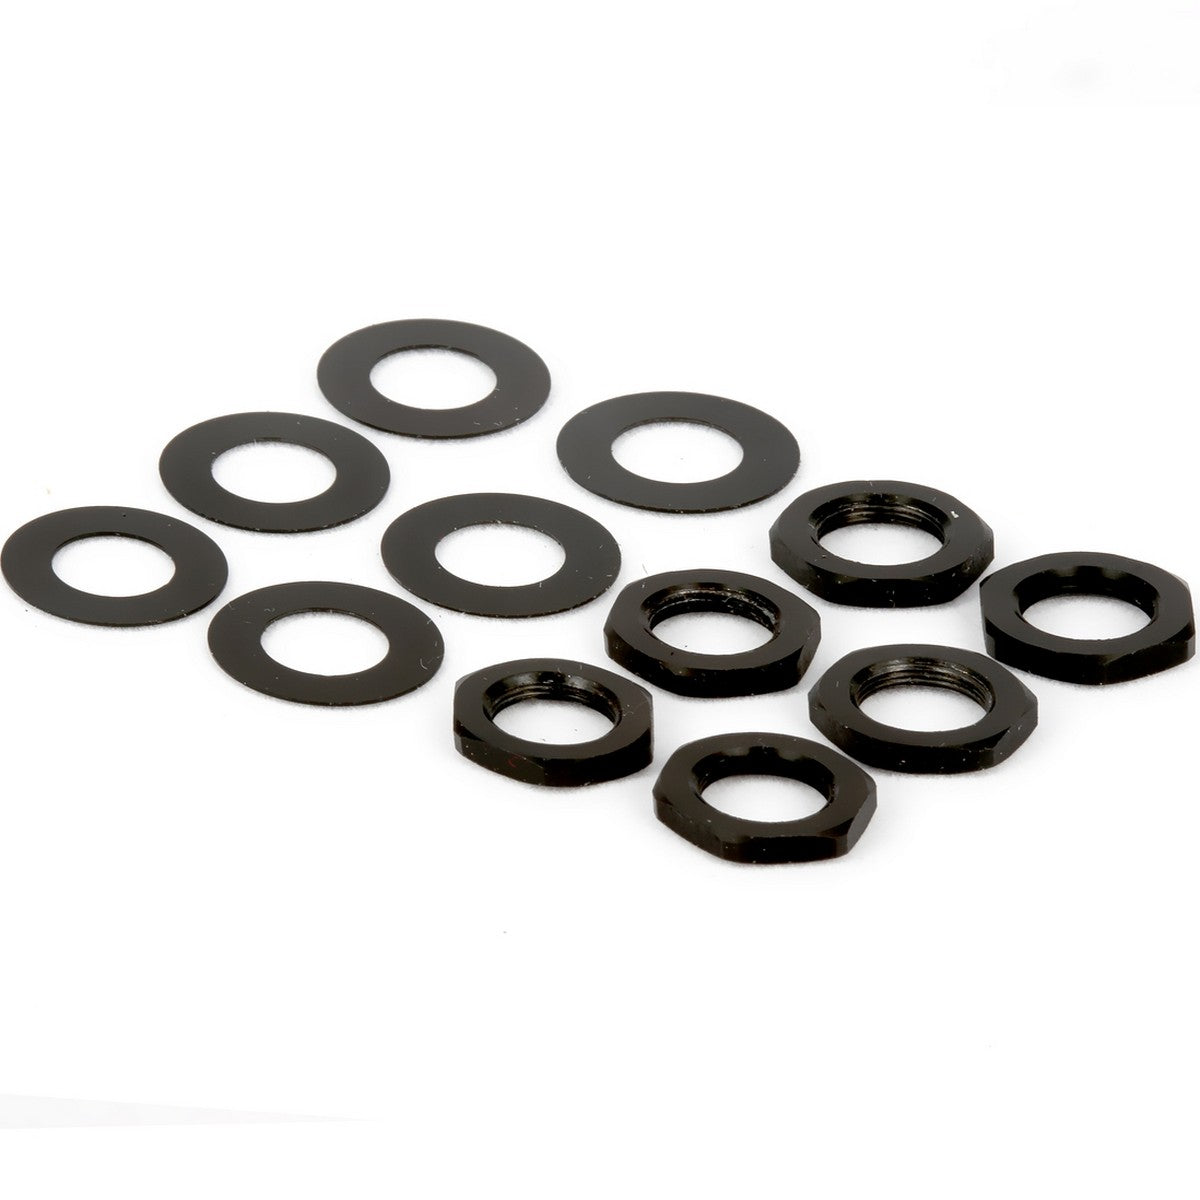 Tronical Hex Nuts and Washers | Nuts Washers for TronicalTune RoboHeads Black Set of 6